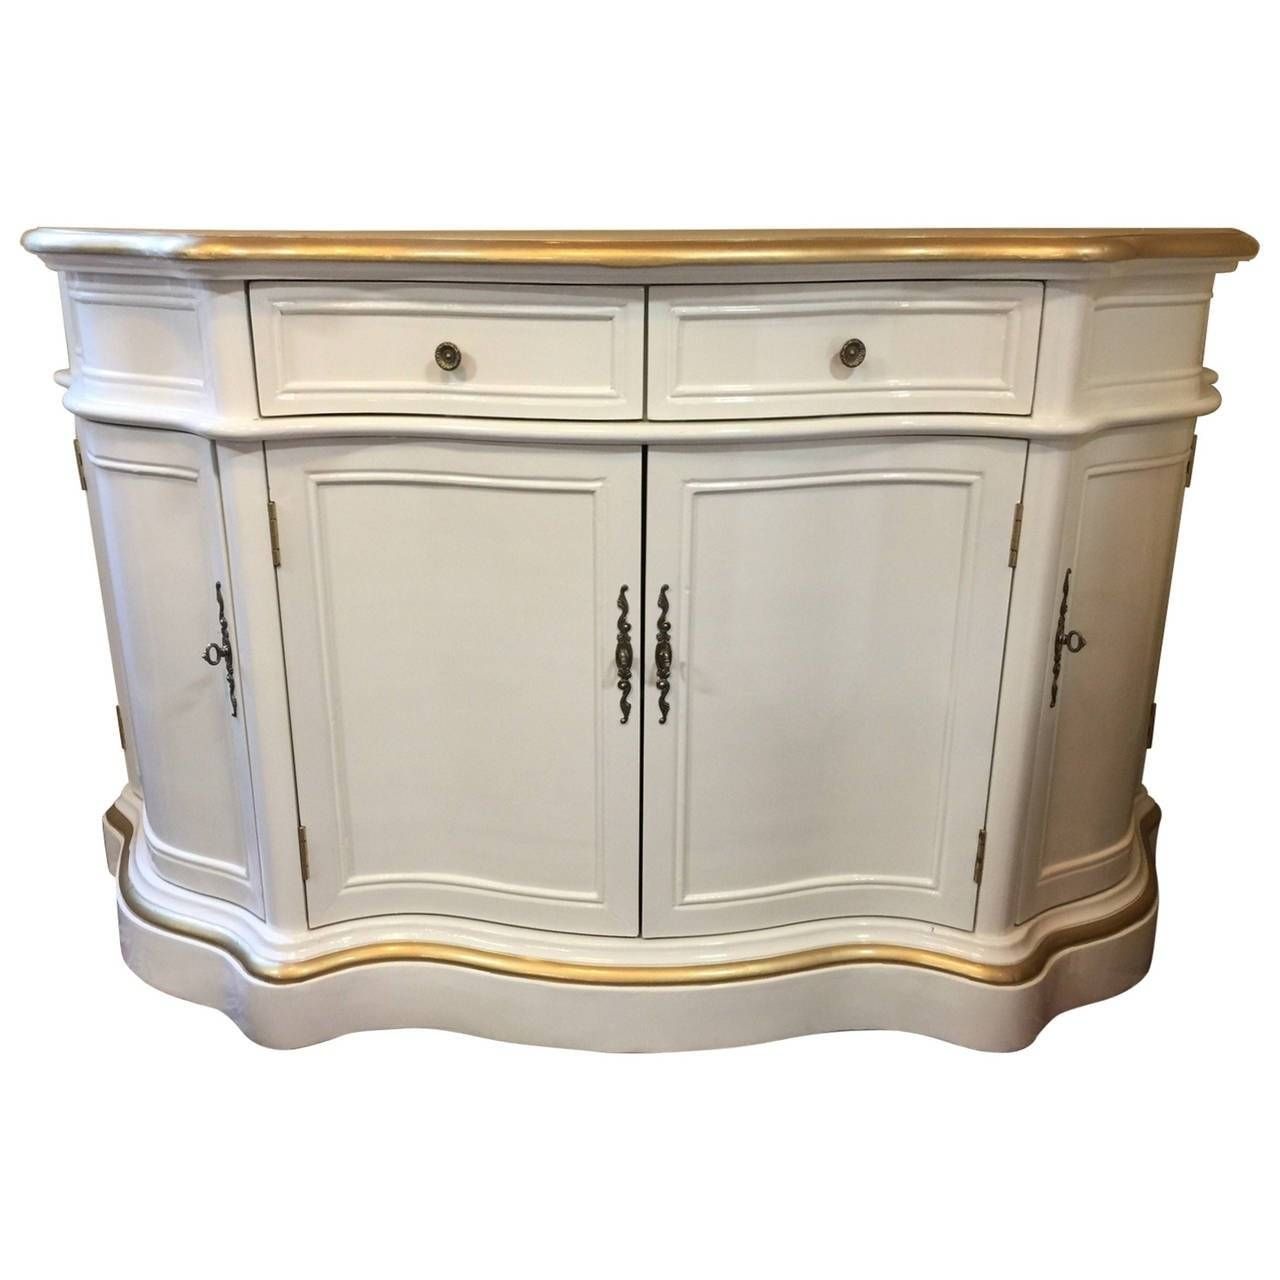 Curvy Lacquered Sideboard In Cream And Gold At 1stdibs In Cream Kitchen Sideboards (View 15 of 15)